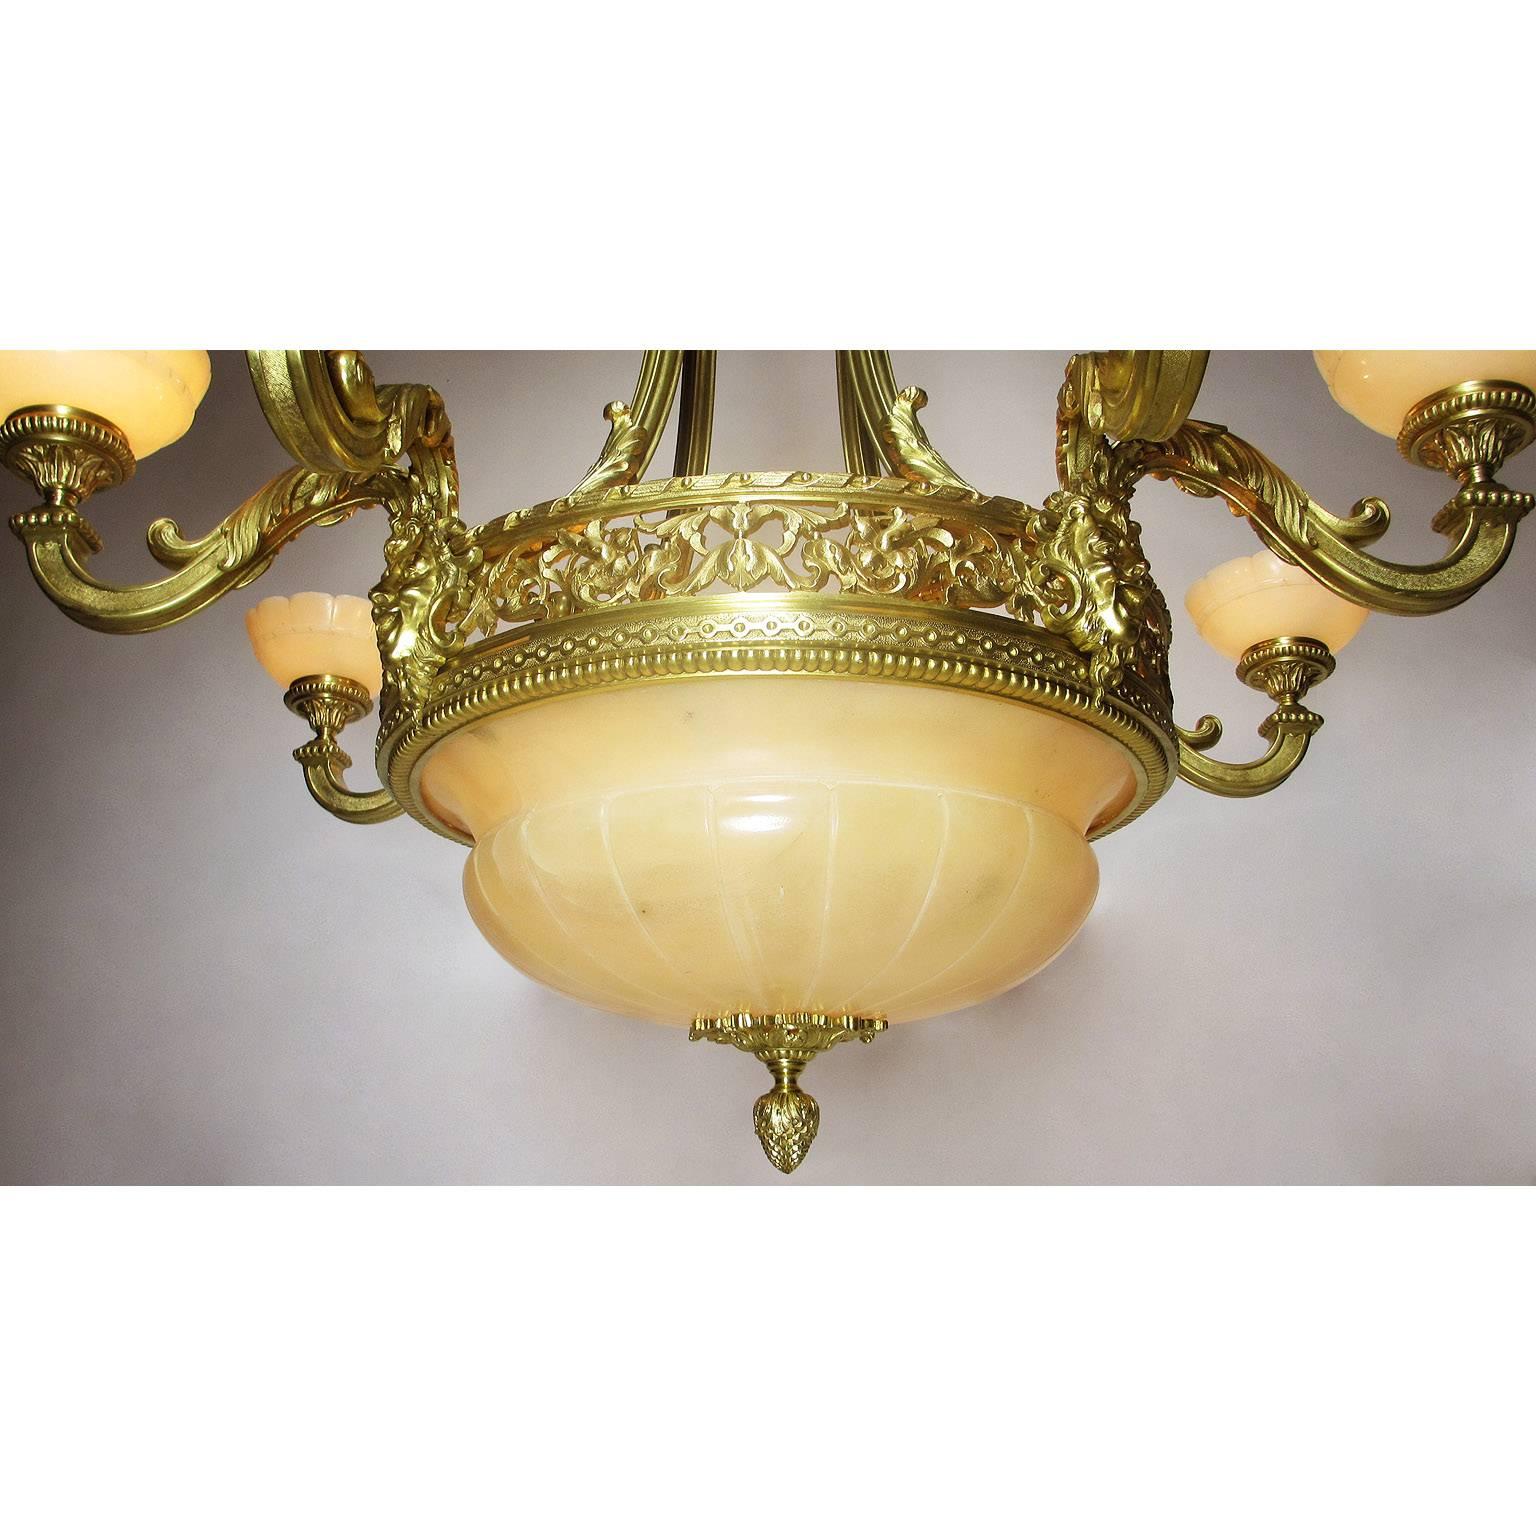 A fine and large French Art Deco gilt bronze and veined alabaster eight-light figural chandelier. The pierced floral circular frame surmounted with a large carved alabaster plafonnier supported with a bronze acorn finial, with a set of four